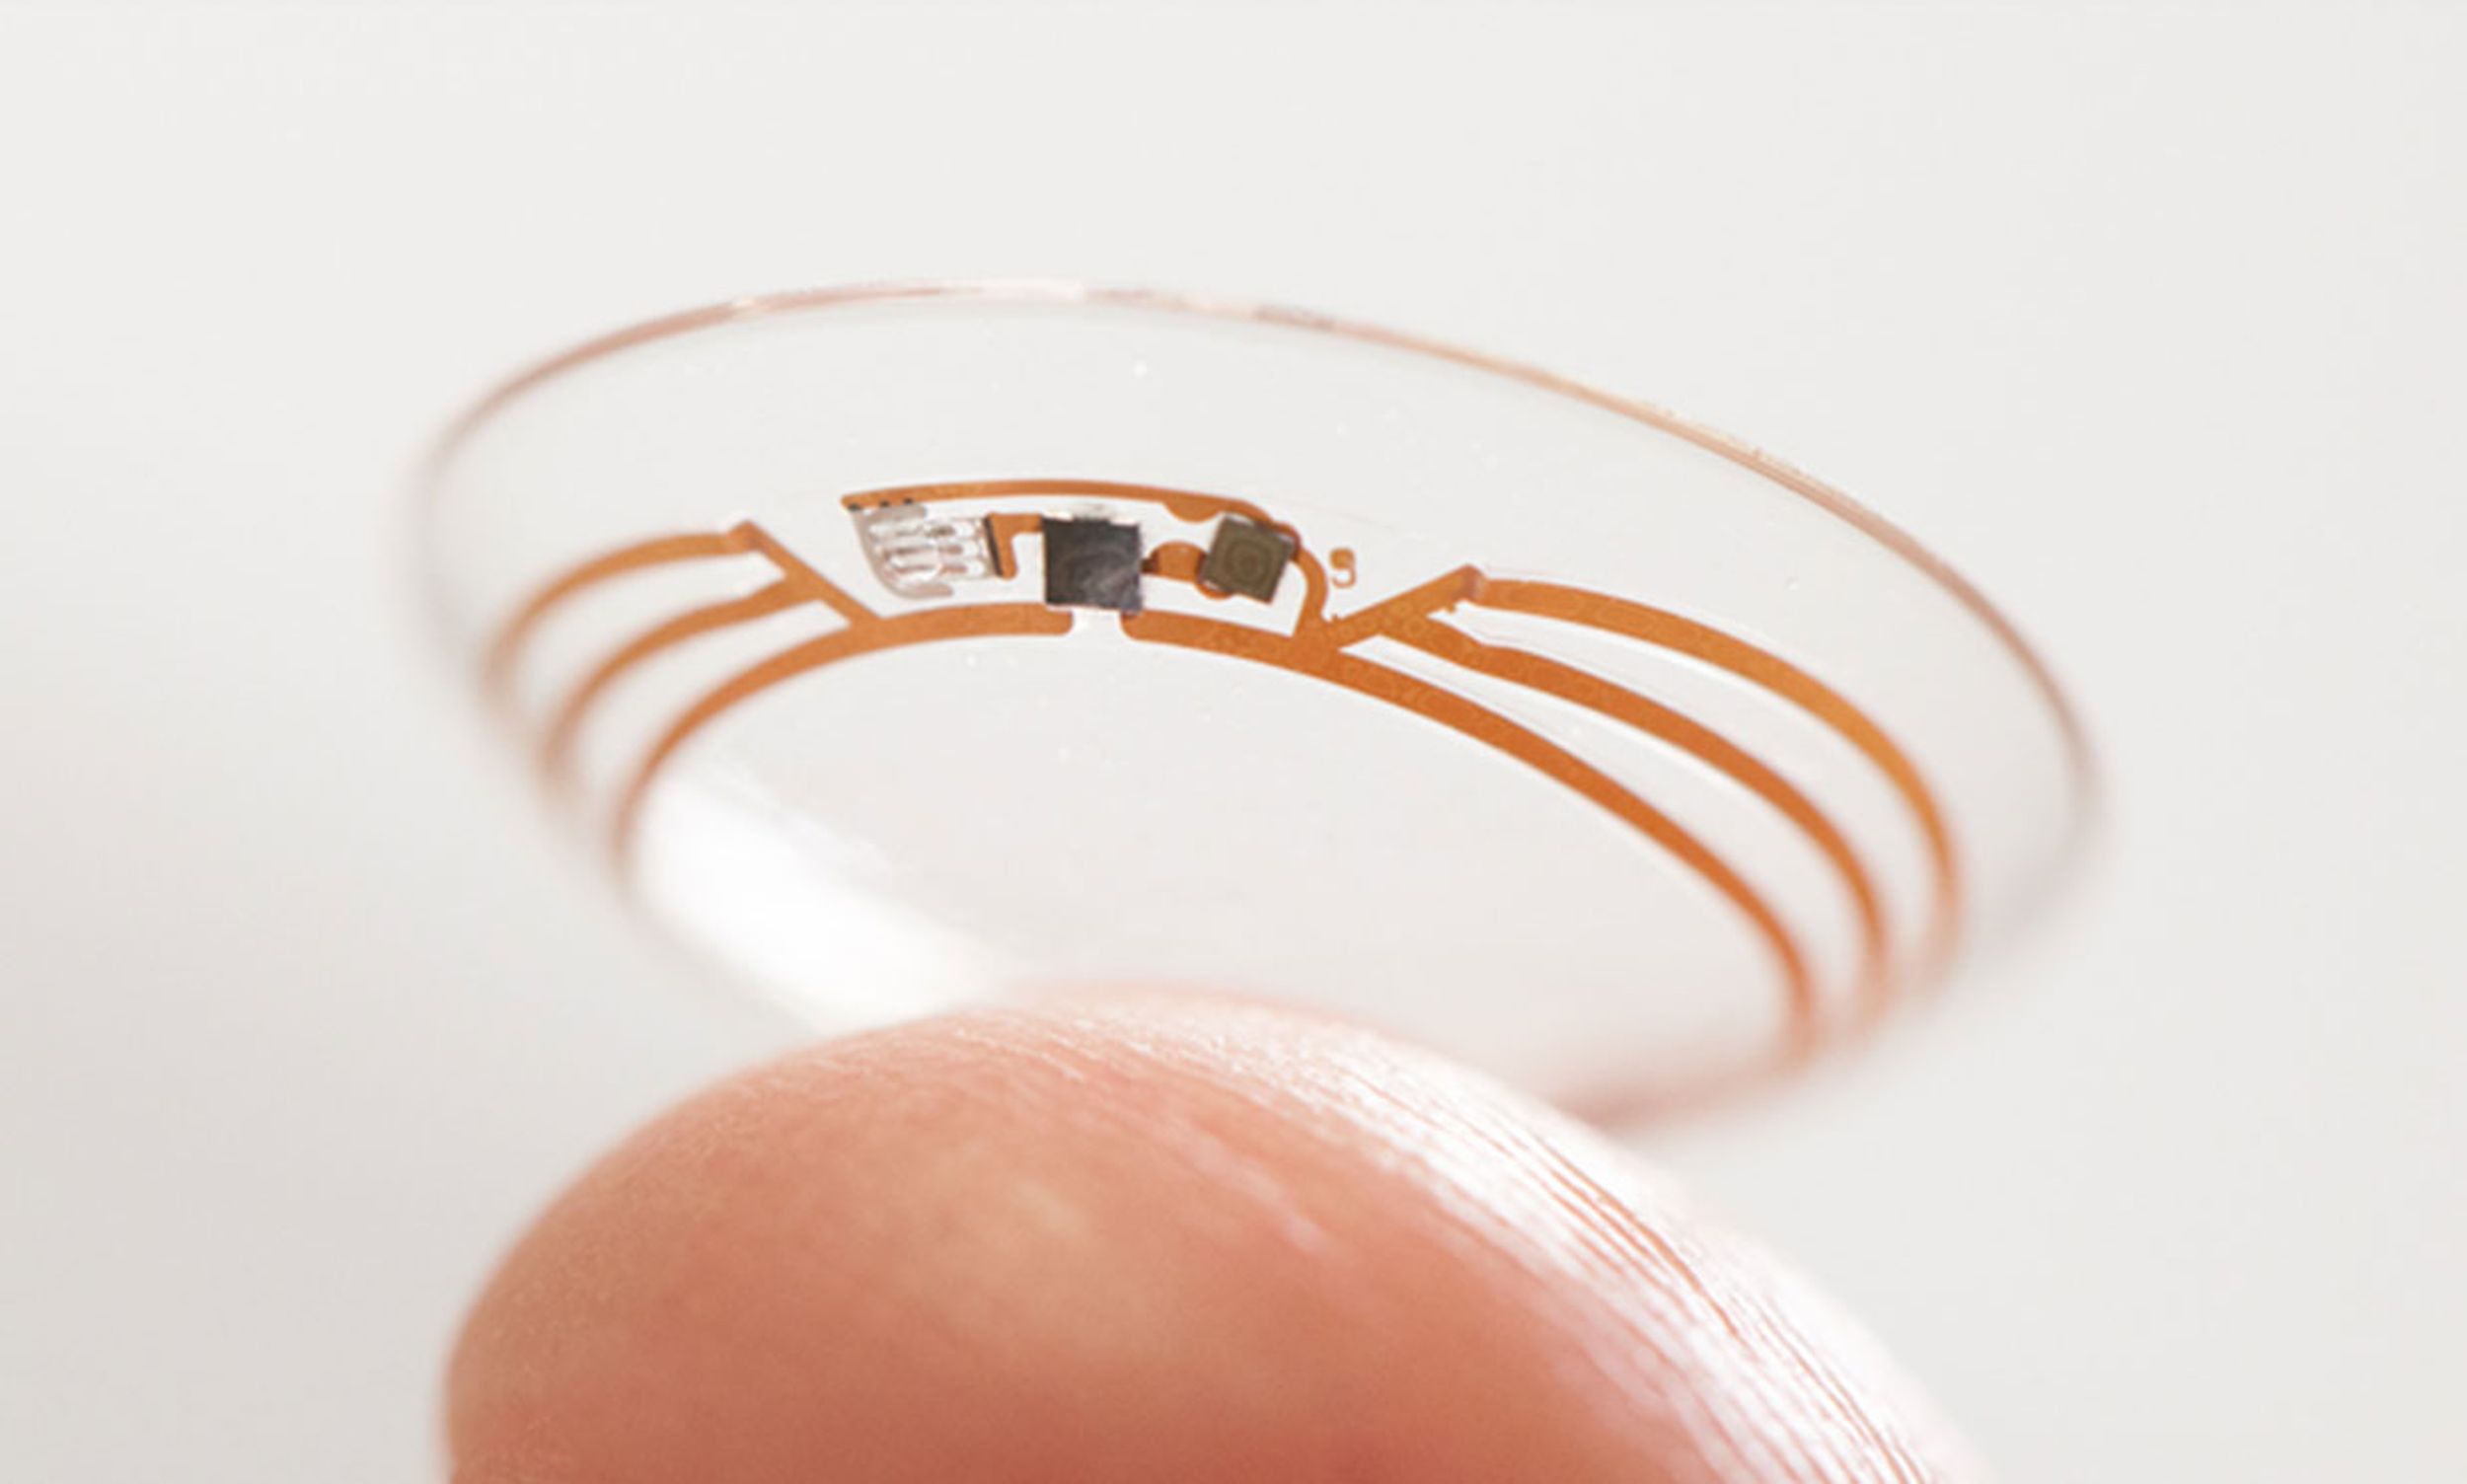 Investigational contact lens device